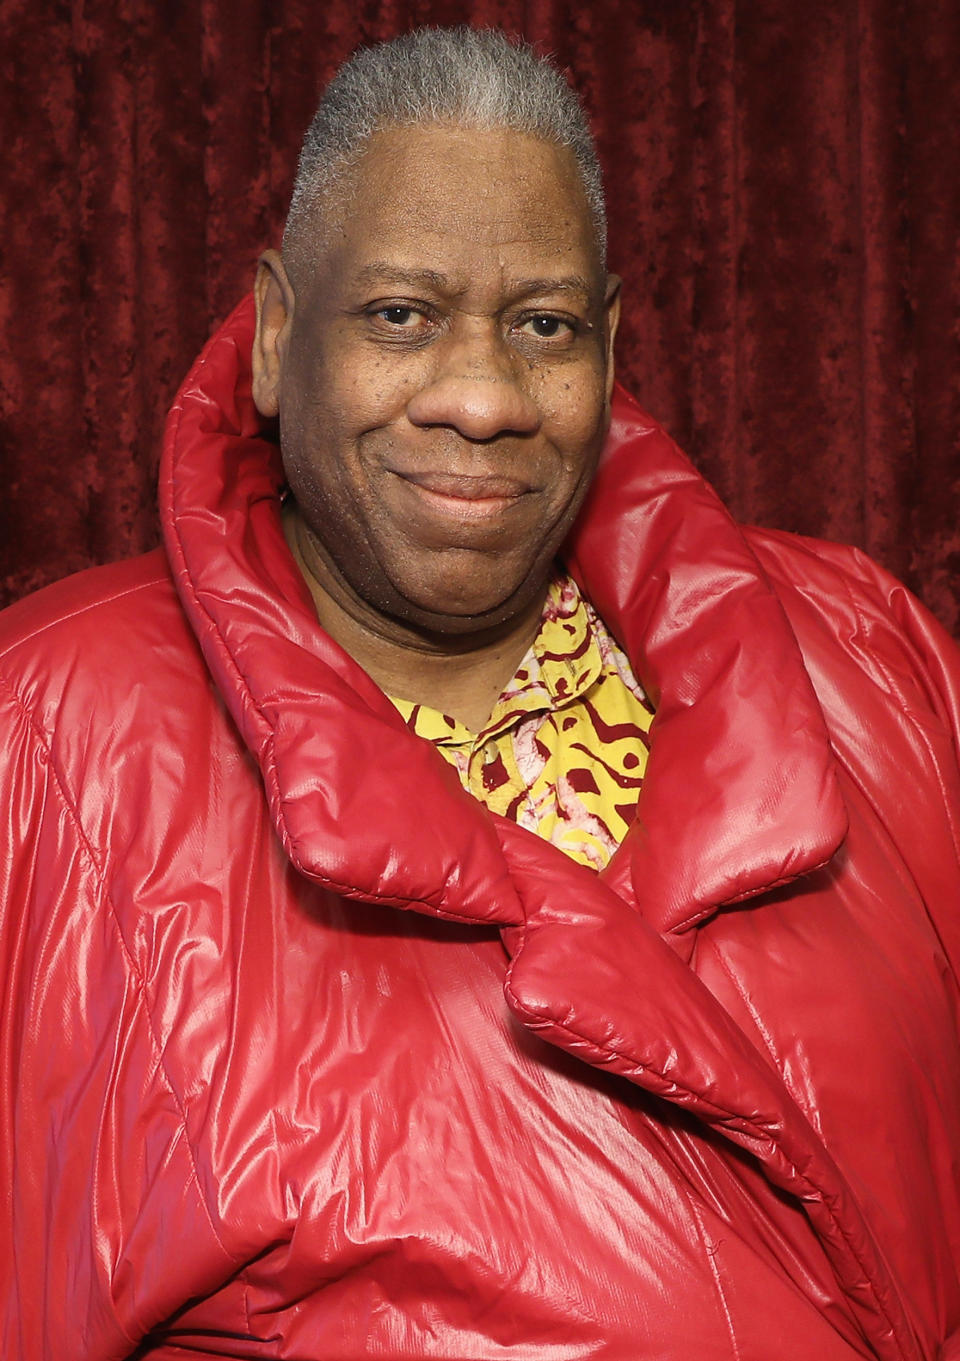 Andre Leon Talley Launches New SiriusXM Show On Andy Cohen's Exclusive SiriusXM Channel Radio Andy (Cindy Ord / Getty Images)